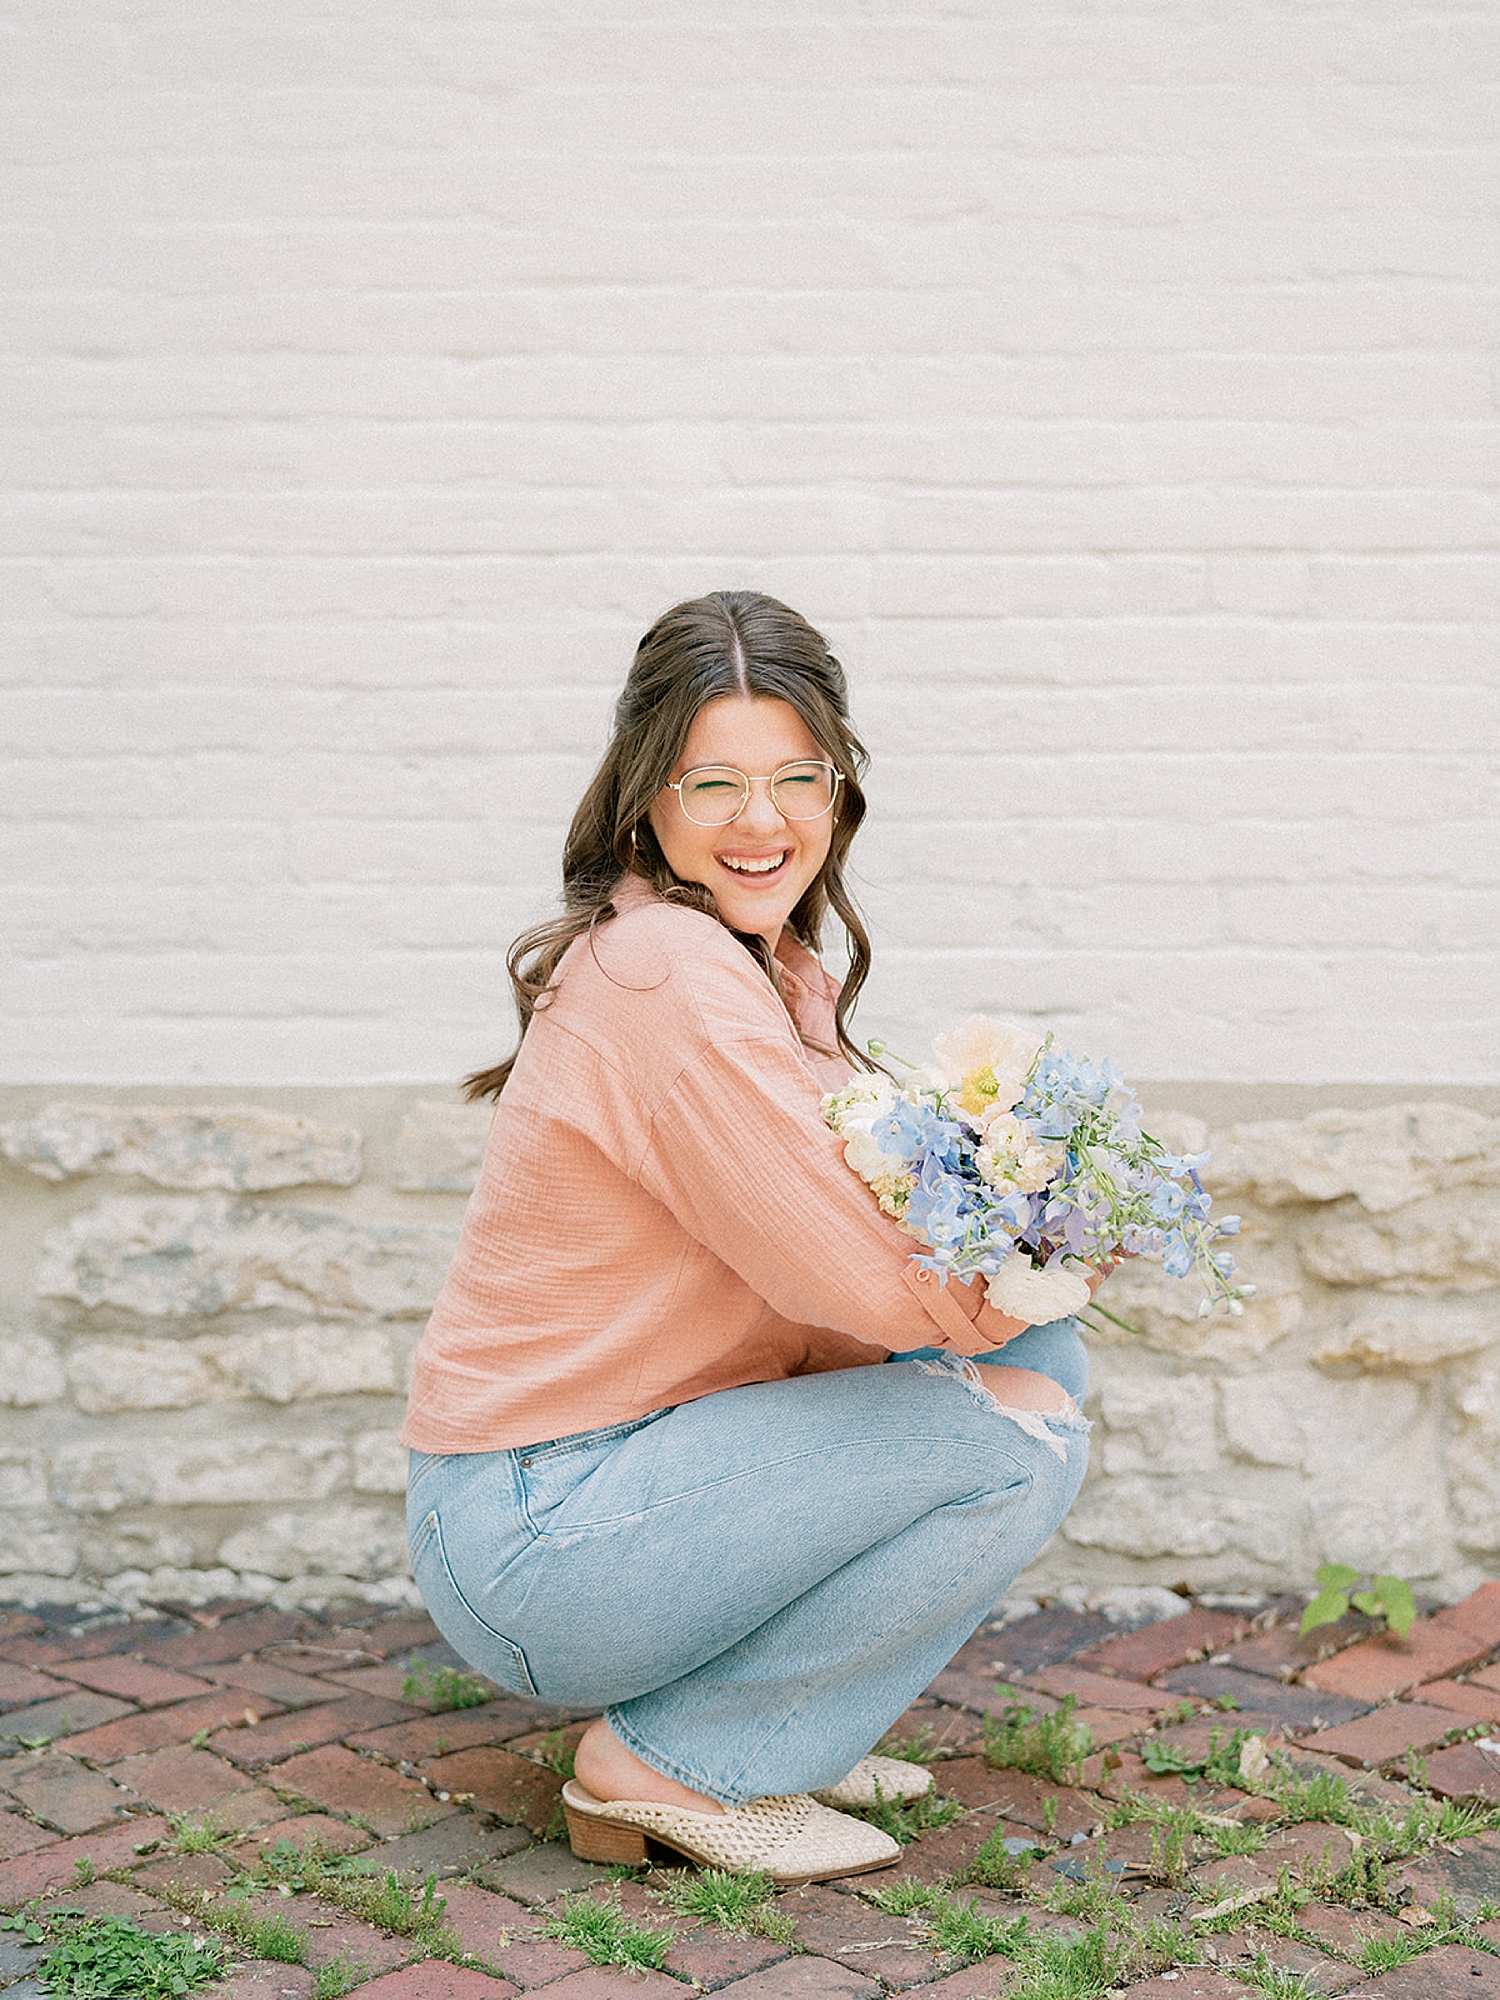 business owner squats down holding flowers during Branding Photoshoot for Online Business Educator